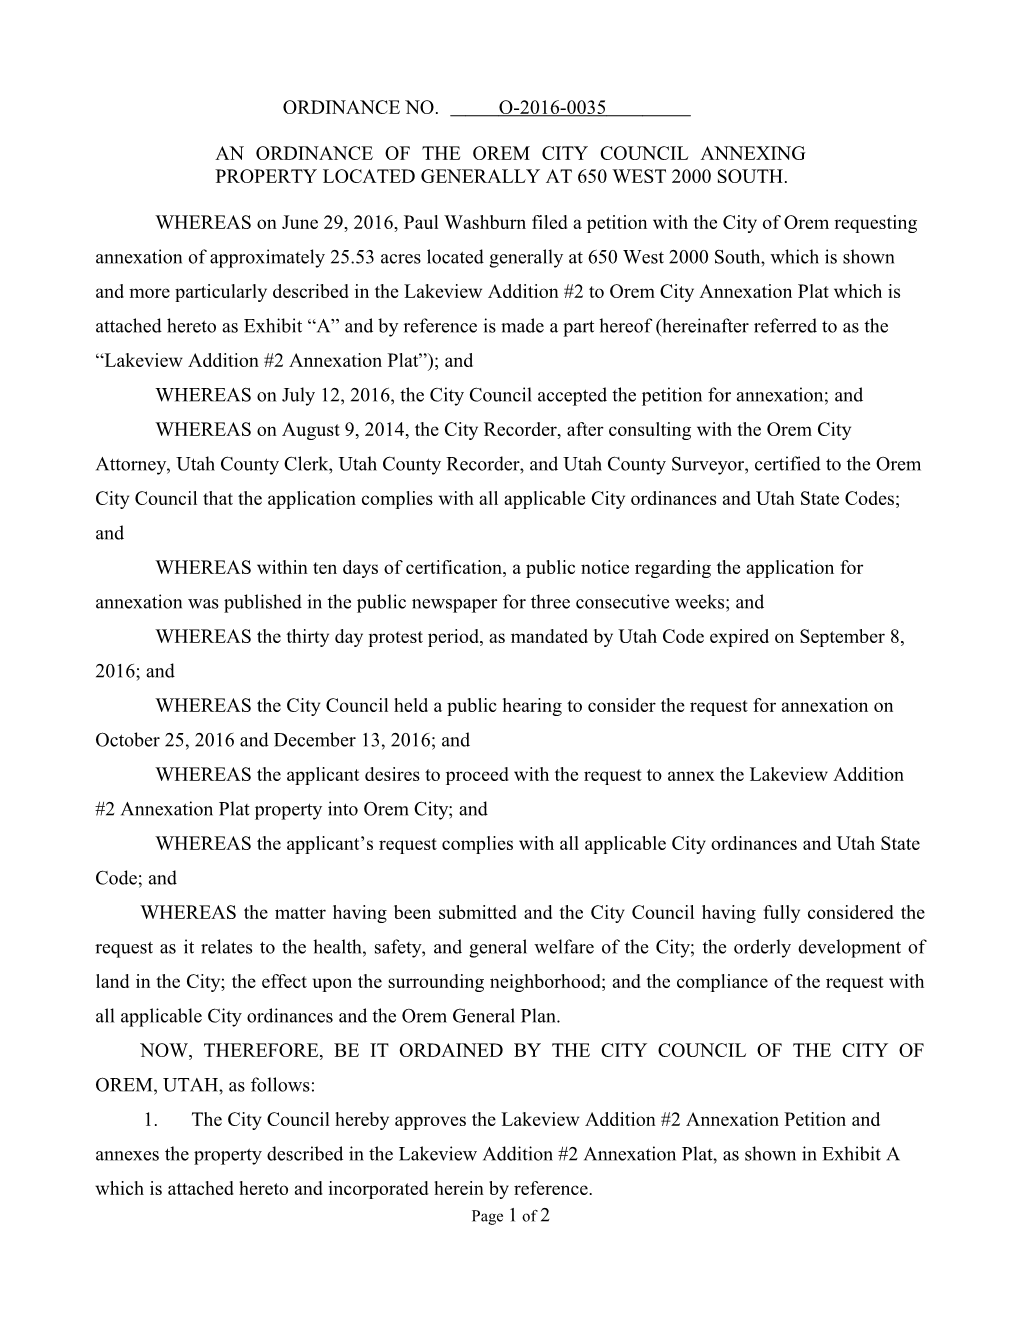 An Ordinance of the Orem City Council Annexing Property Located at 2000 South Sandhill